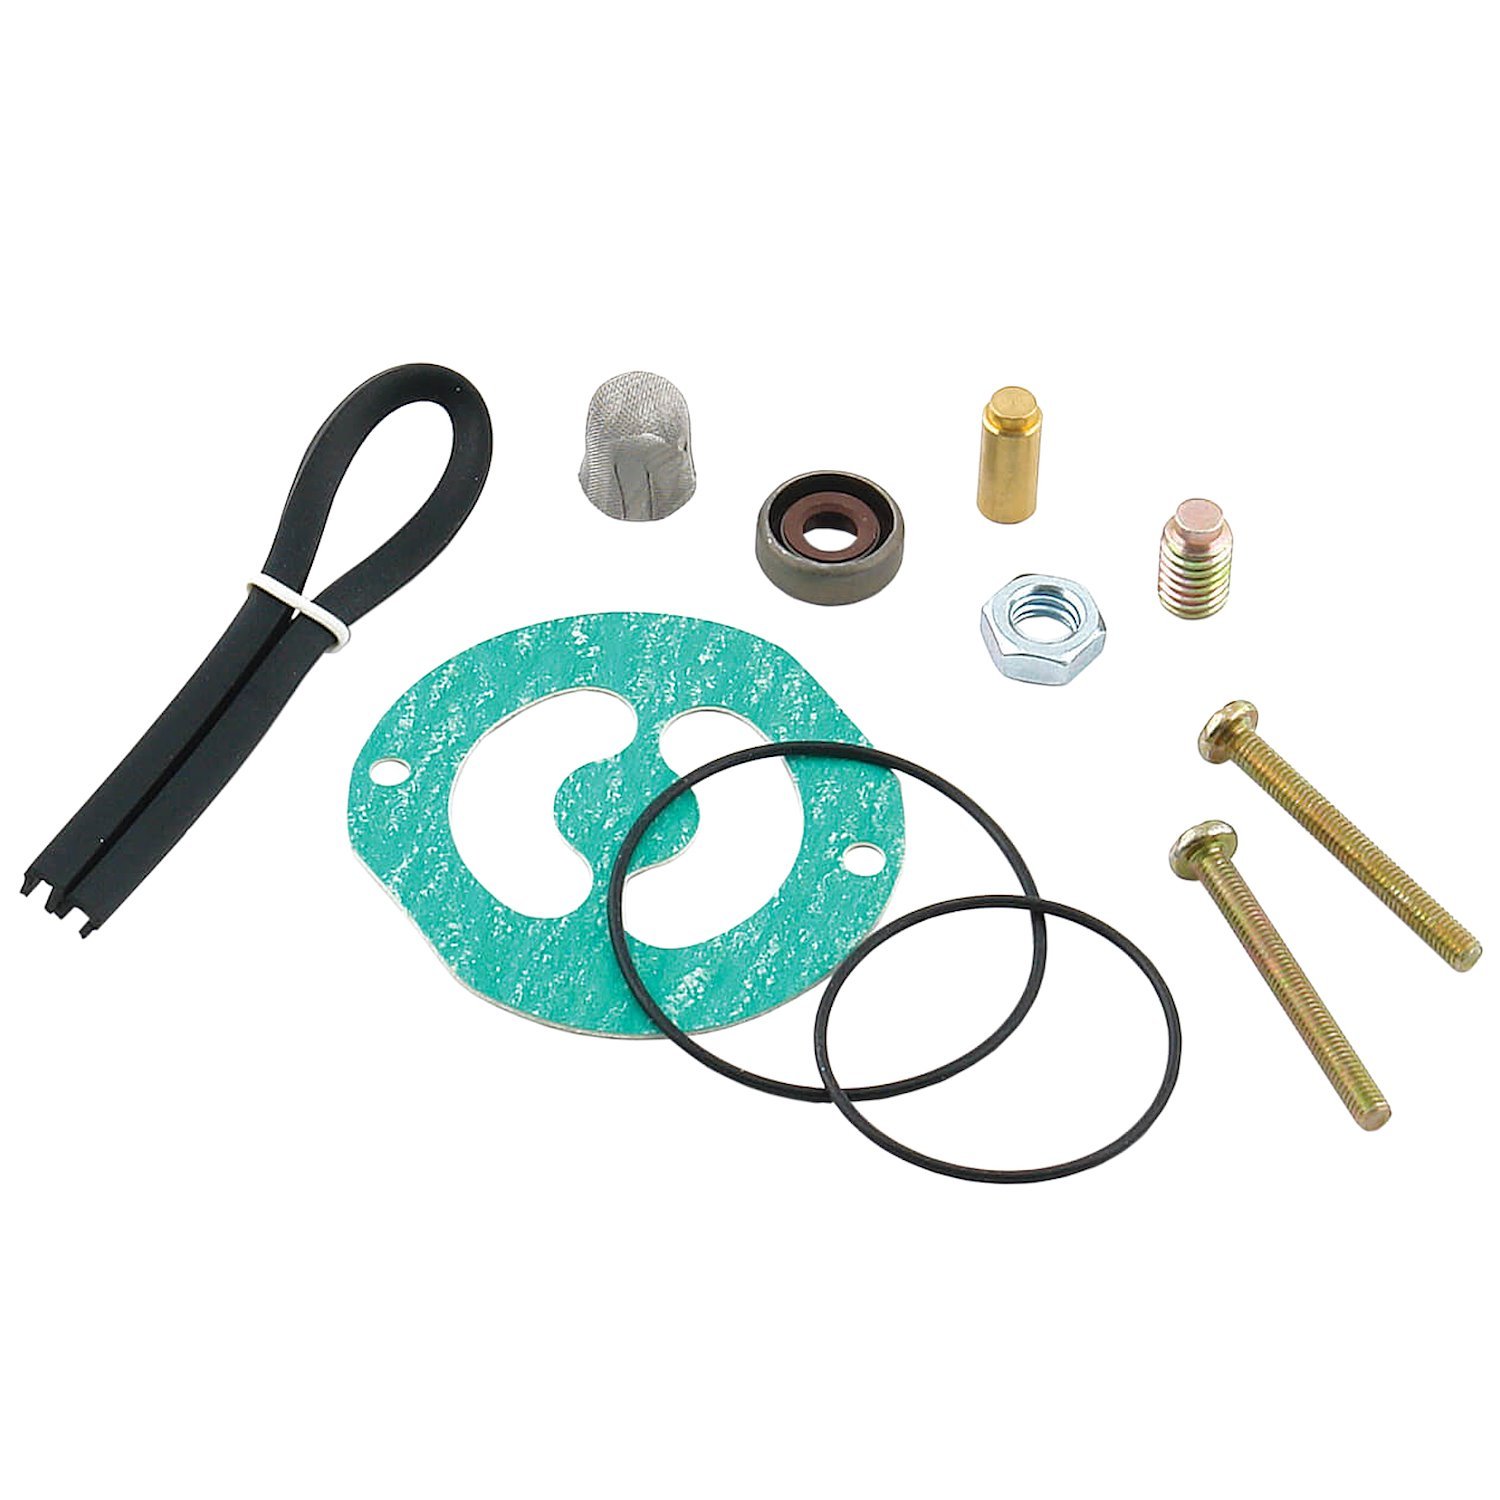 Replacement Diaphragm Kit For Fuel Pumps 110FI and